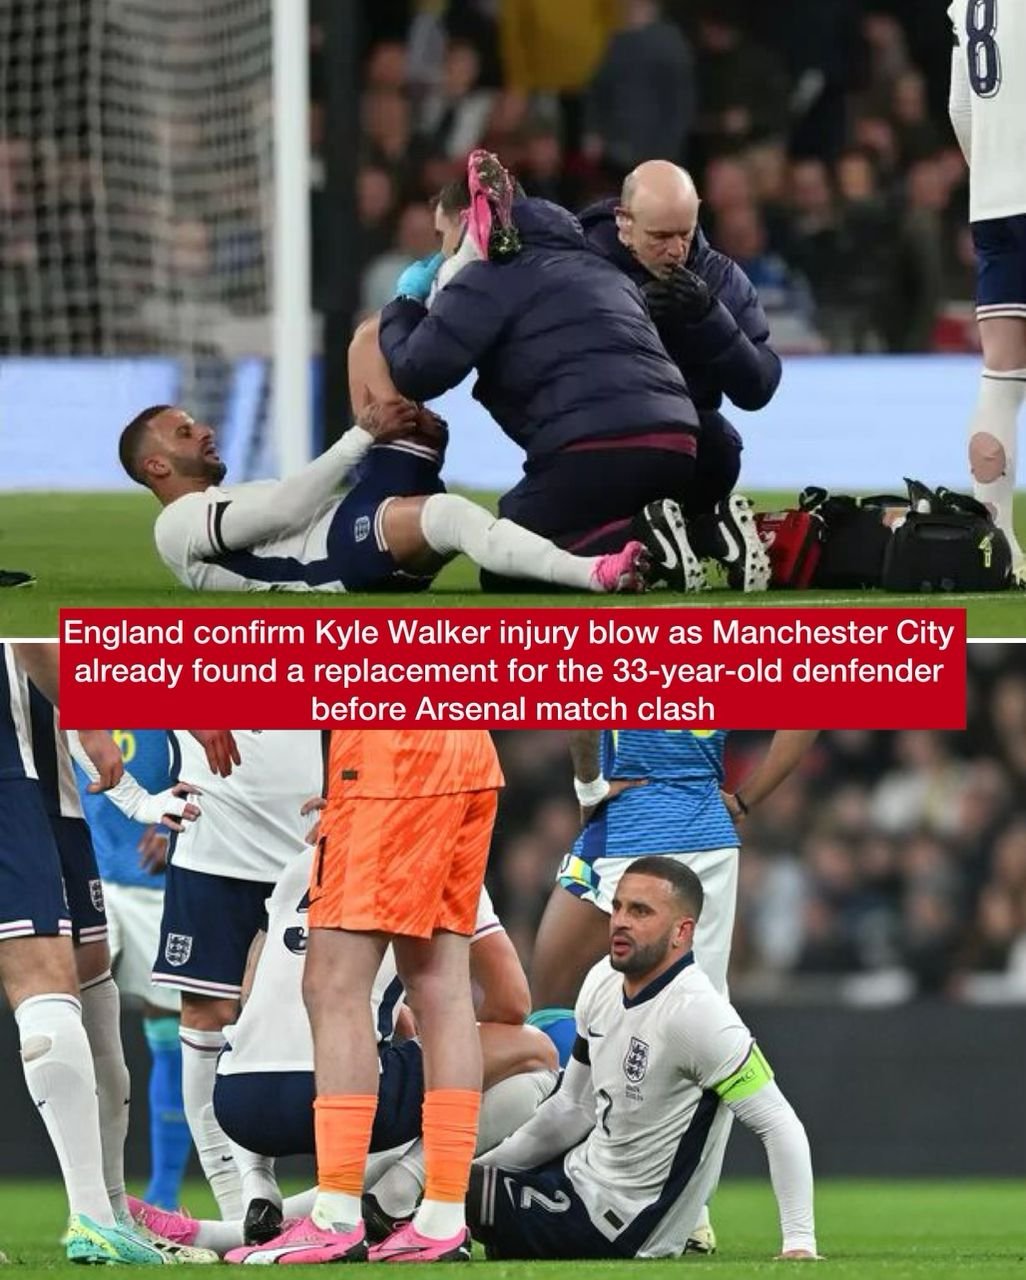 England confirm Kyle Walker injury blow as Manchester City already found a replacement for the 33-year-old denfender before Arsenal match clash